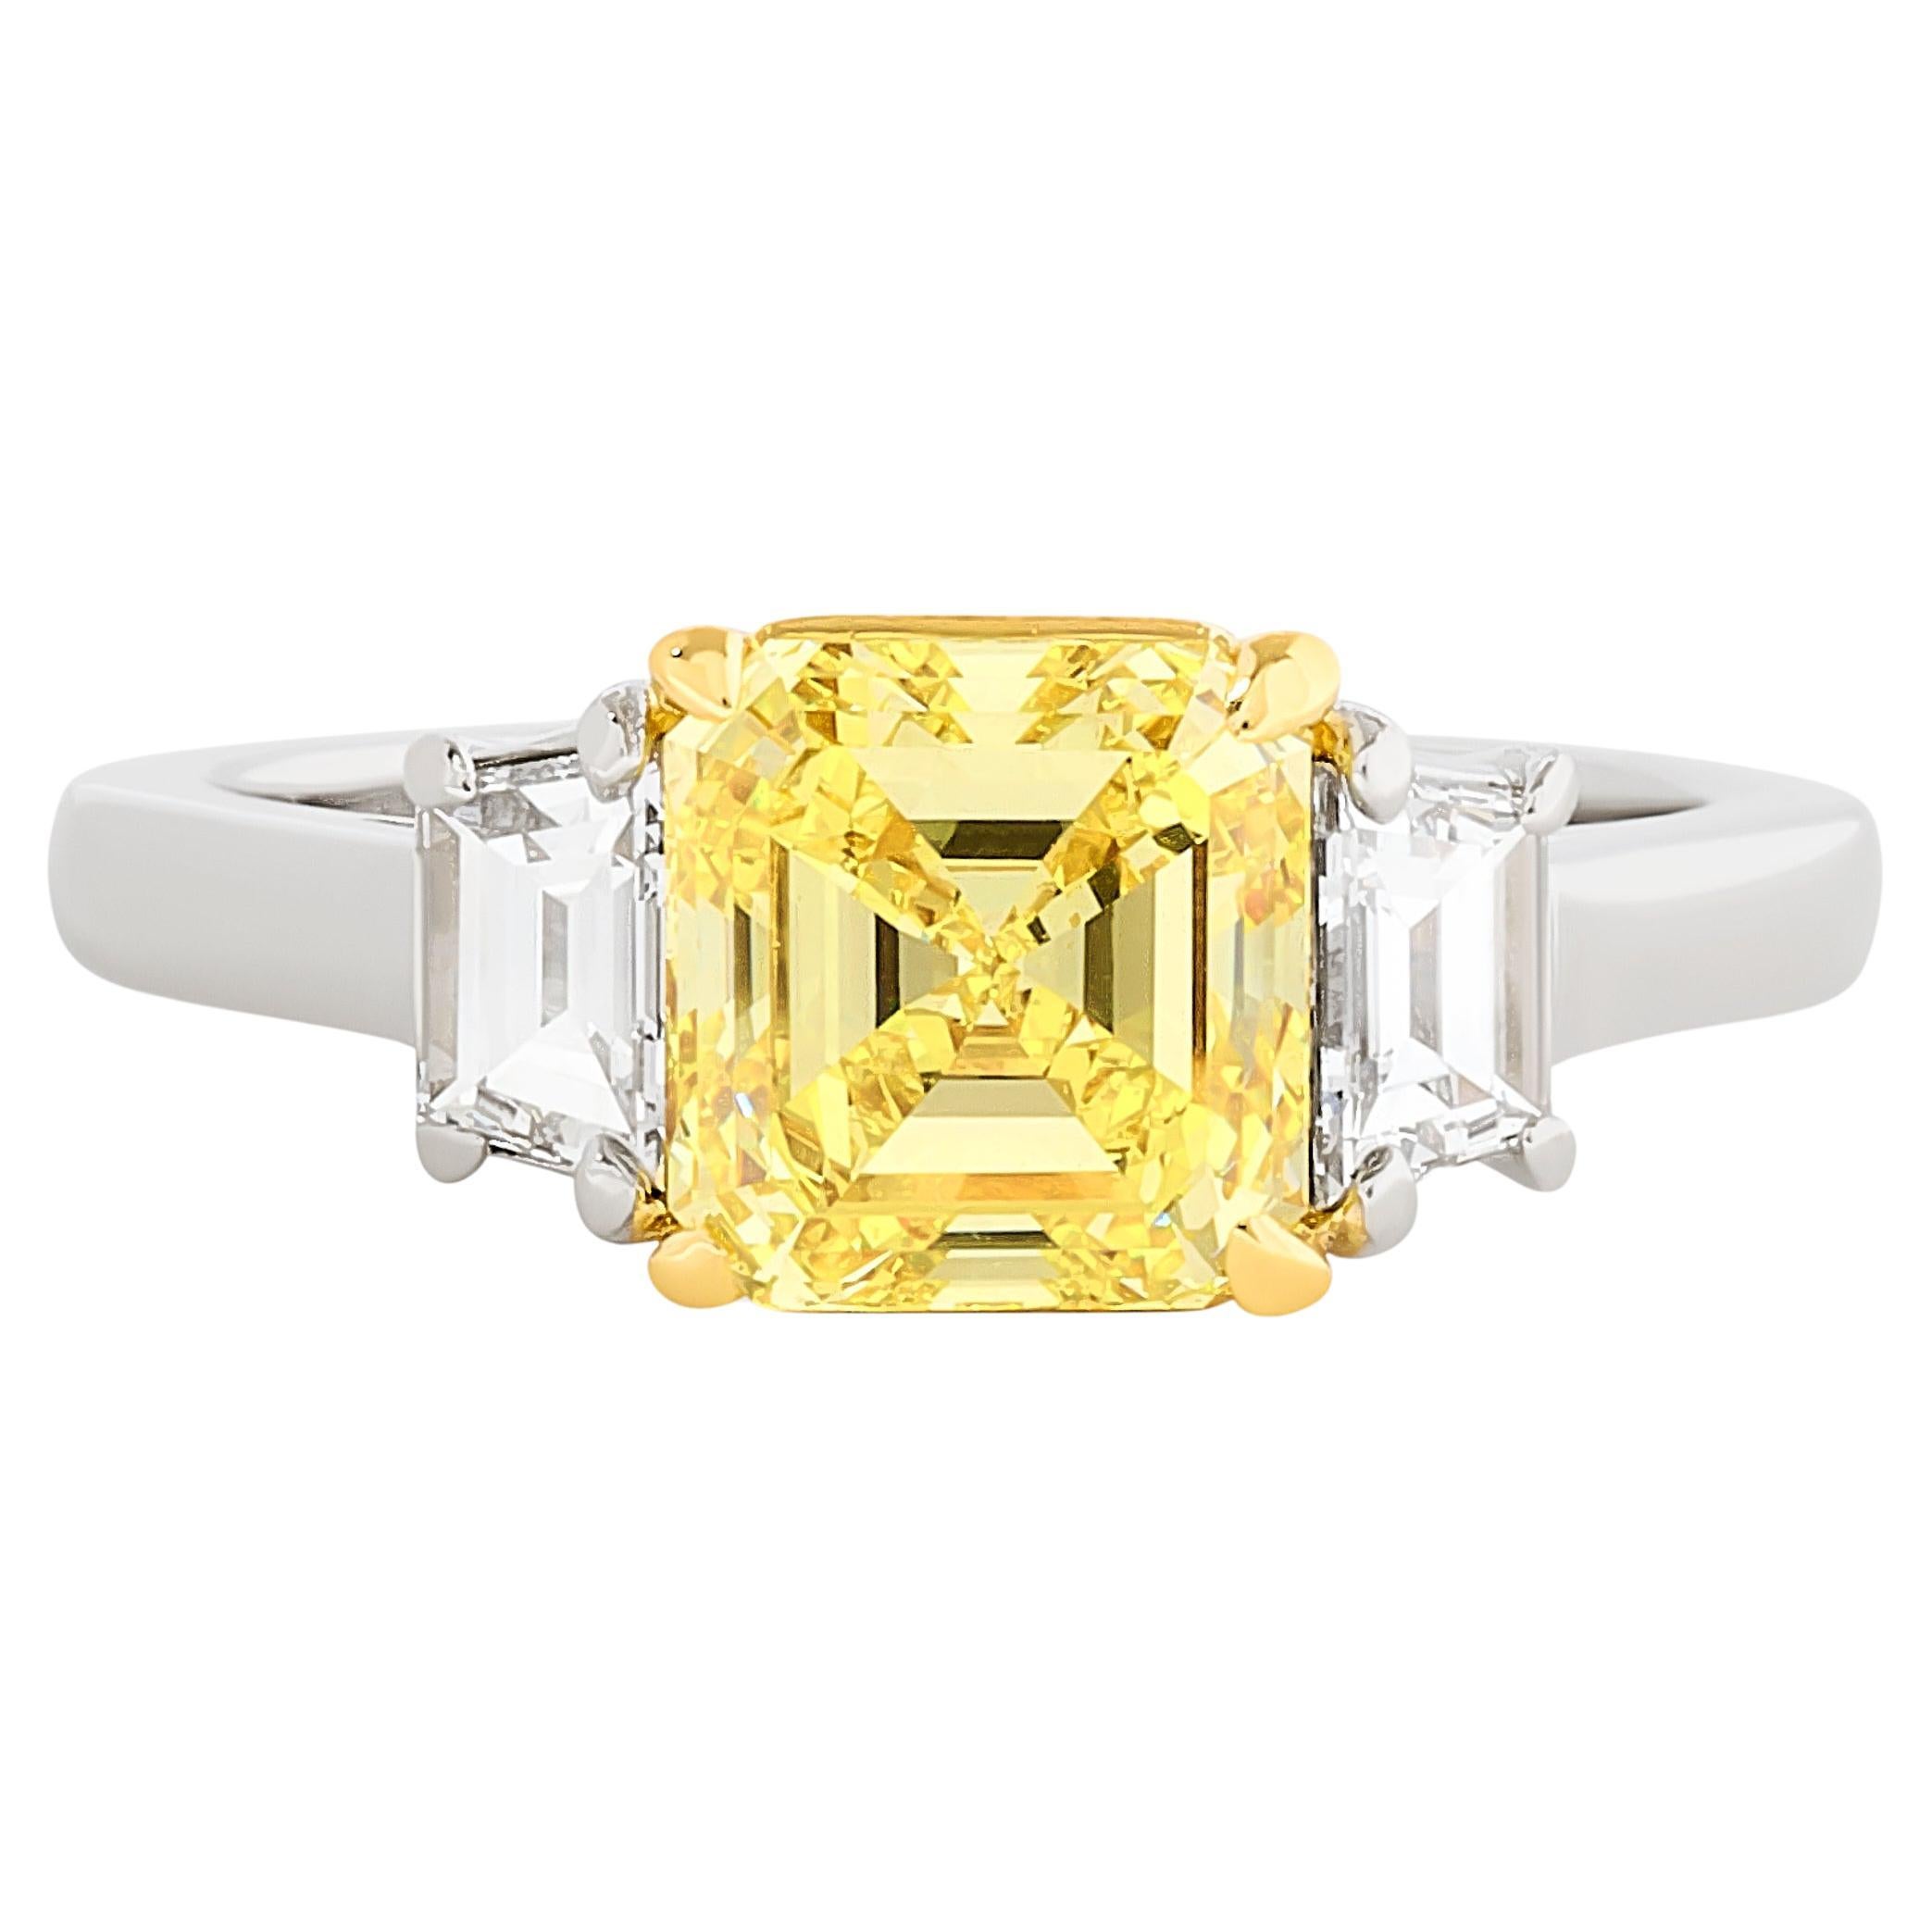 Cartier Yellow Square Emerald Cut Diamond 3 Stone Ring in PLAT/18K Yellow Gold For Sale